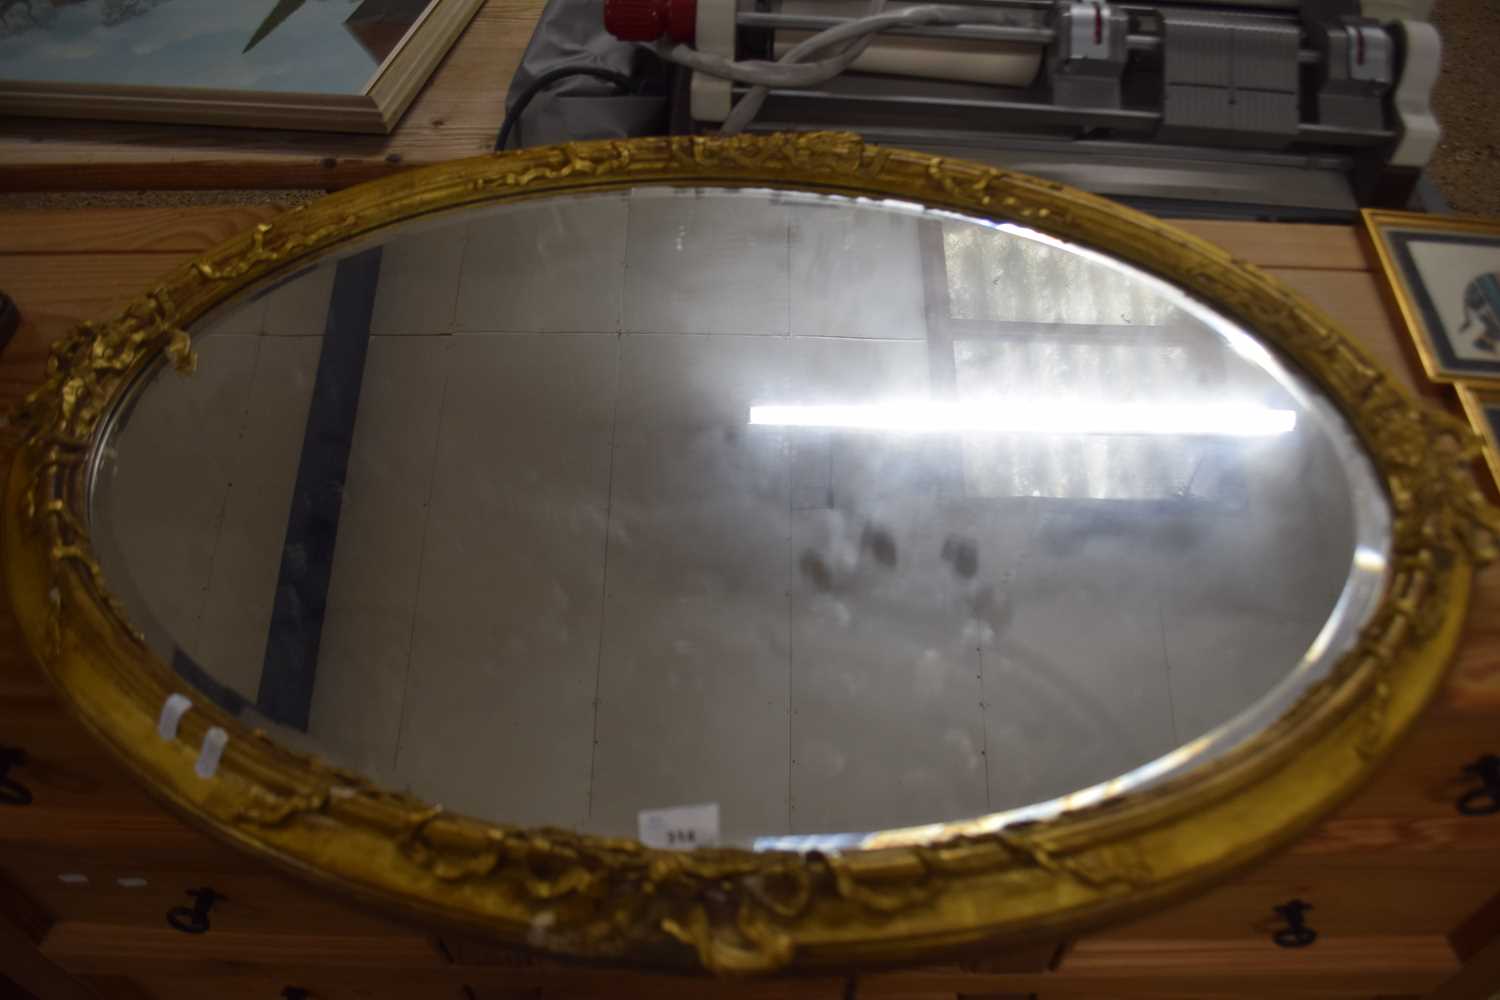 19th Century oval bevelled wall mirror in gilt finish frame with ribbon decoration